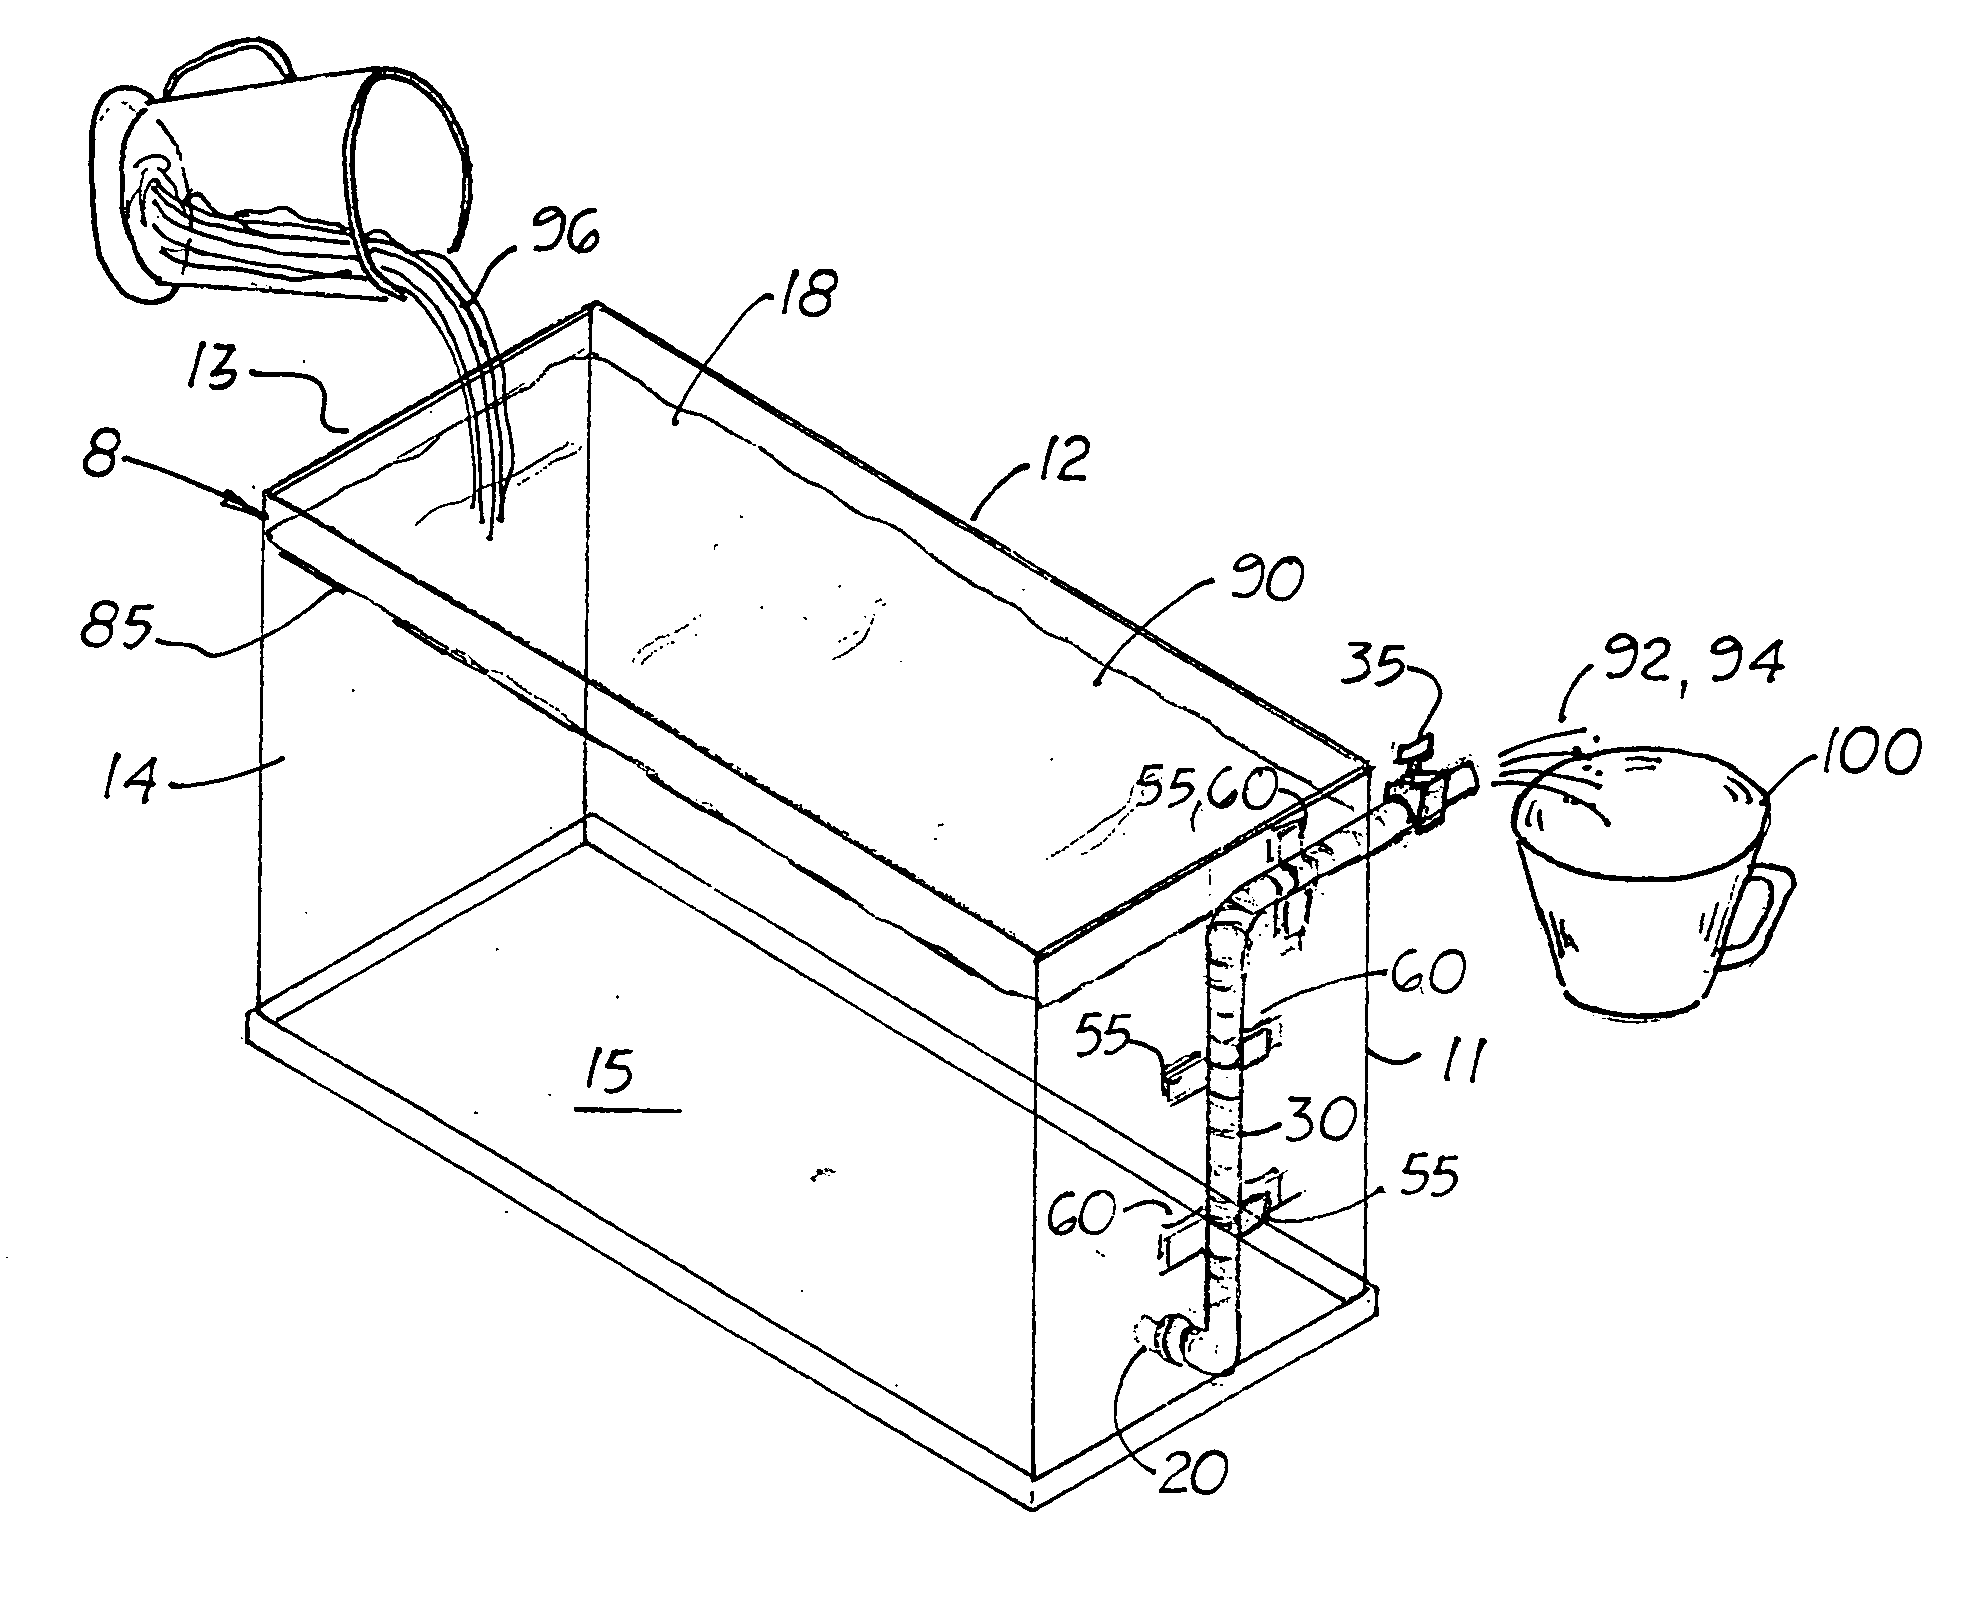 Fish tank with integrated gravity assisted cleaning apparatus